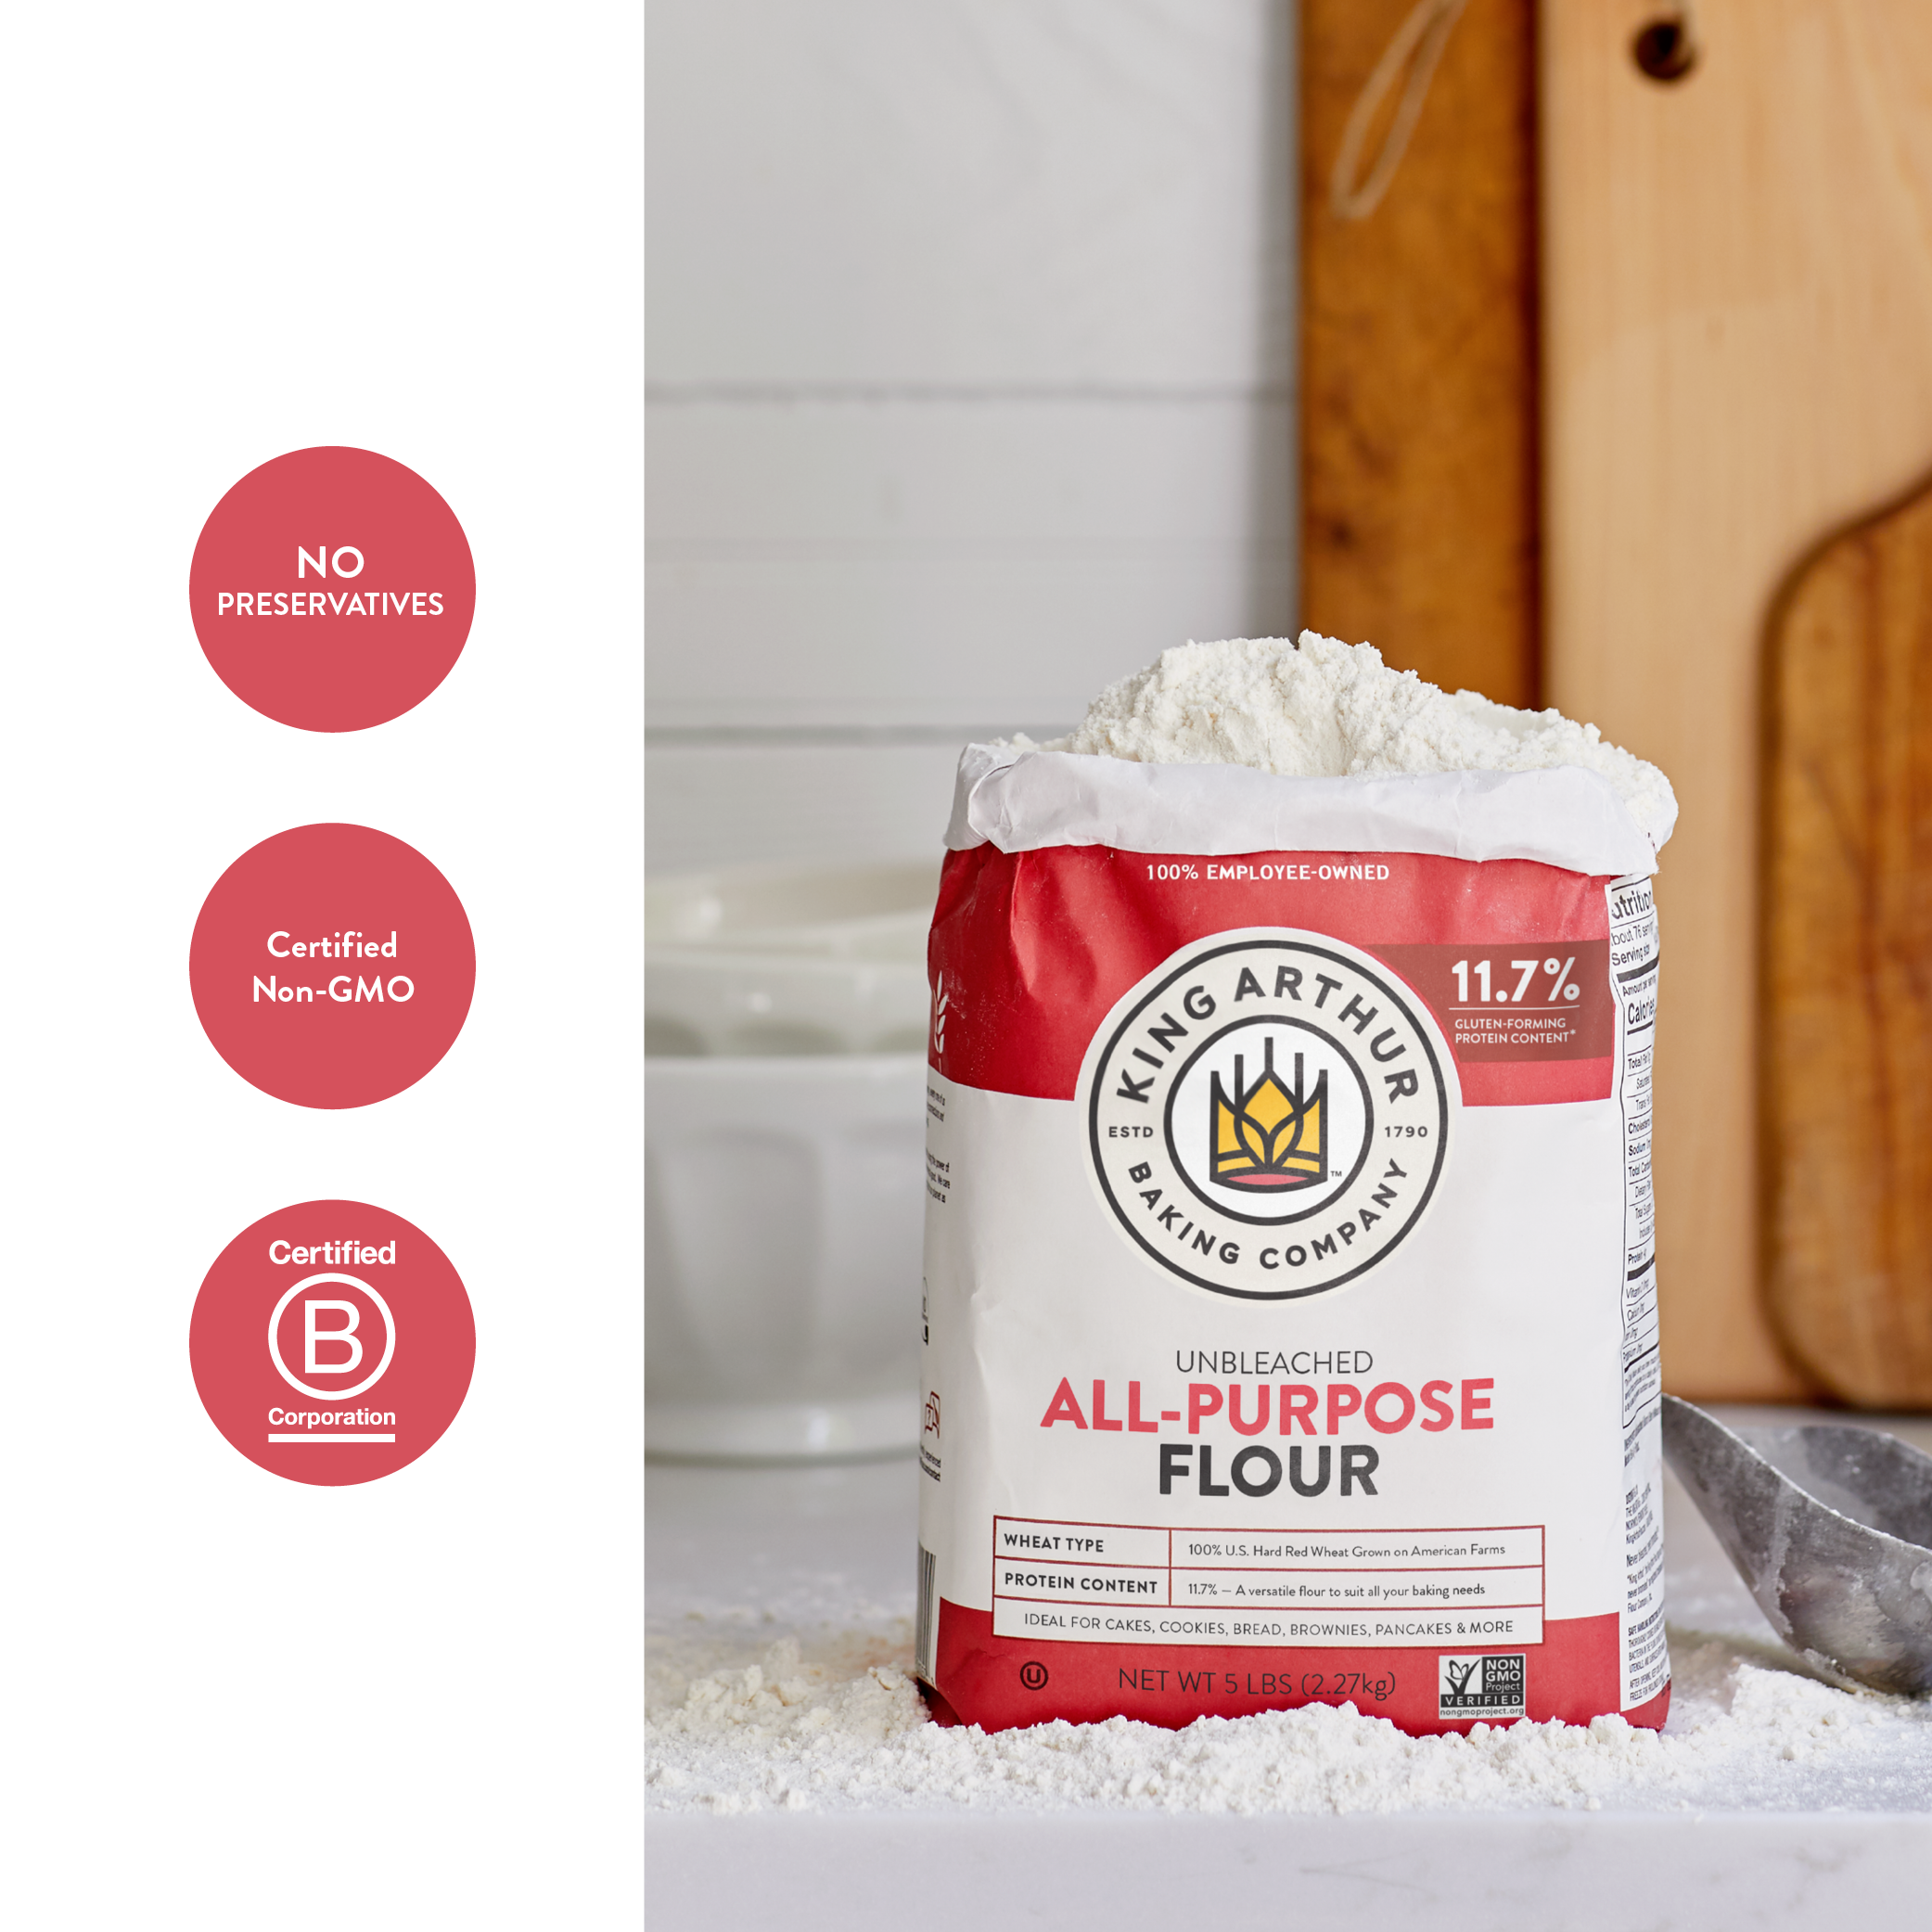 King Arthur Baking Company All-Purpose Unbleached Flour 5lbs - image 4 of 5